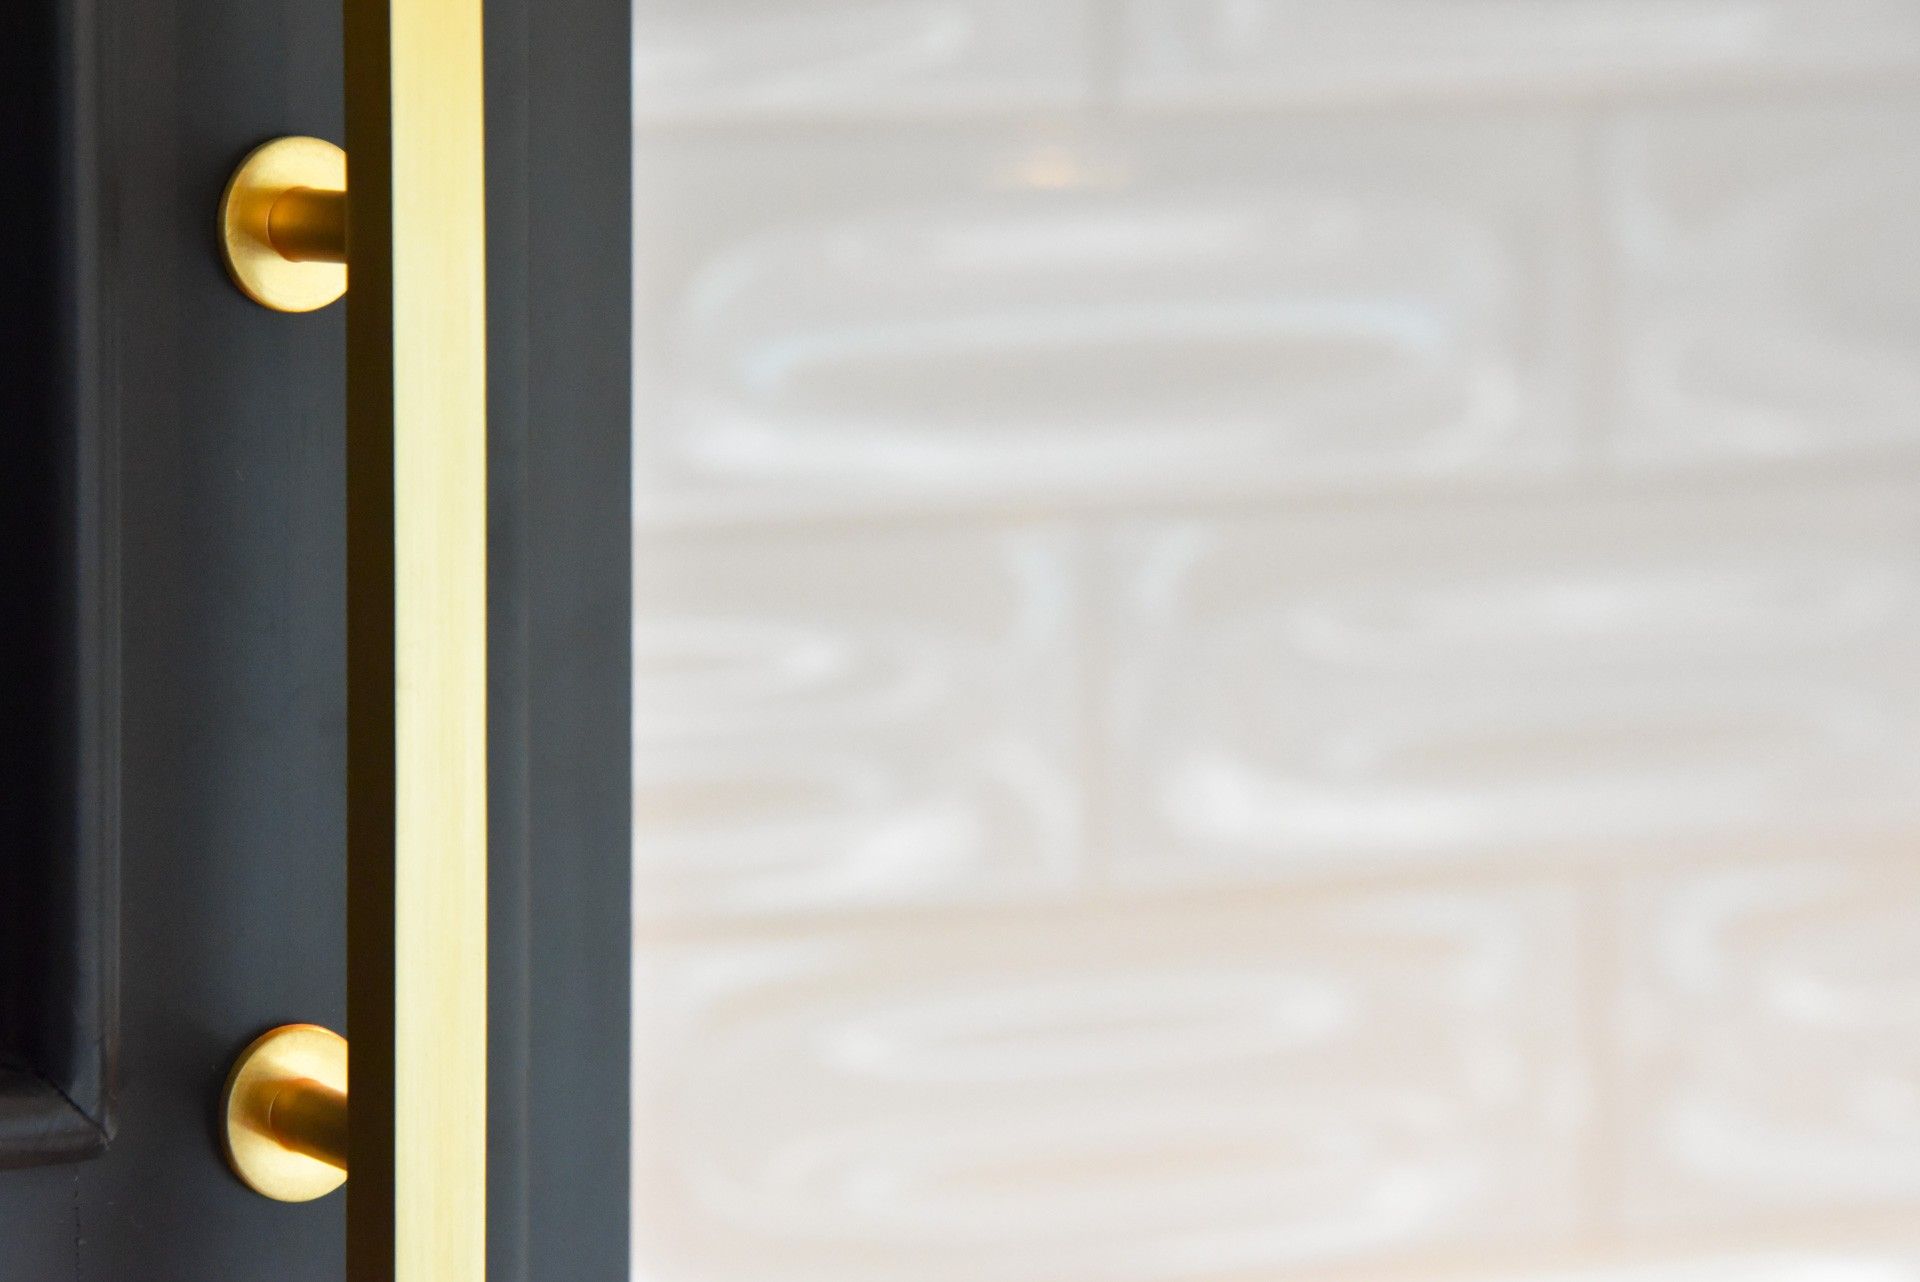 Van Alen tower apartments gold hardware detail on cabinets